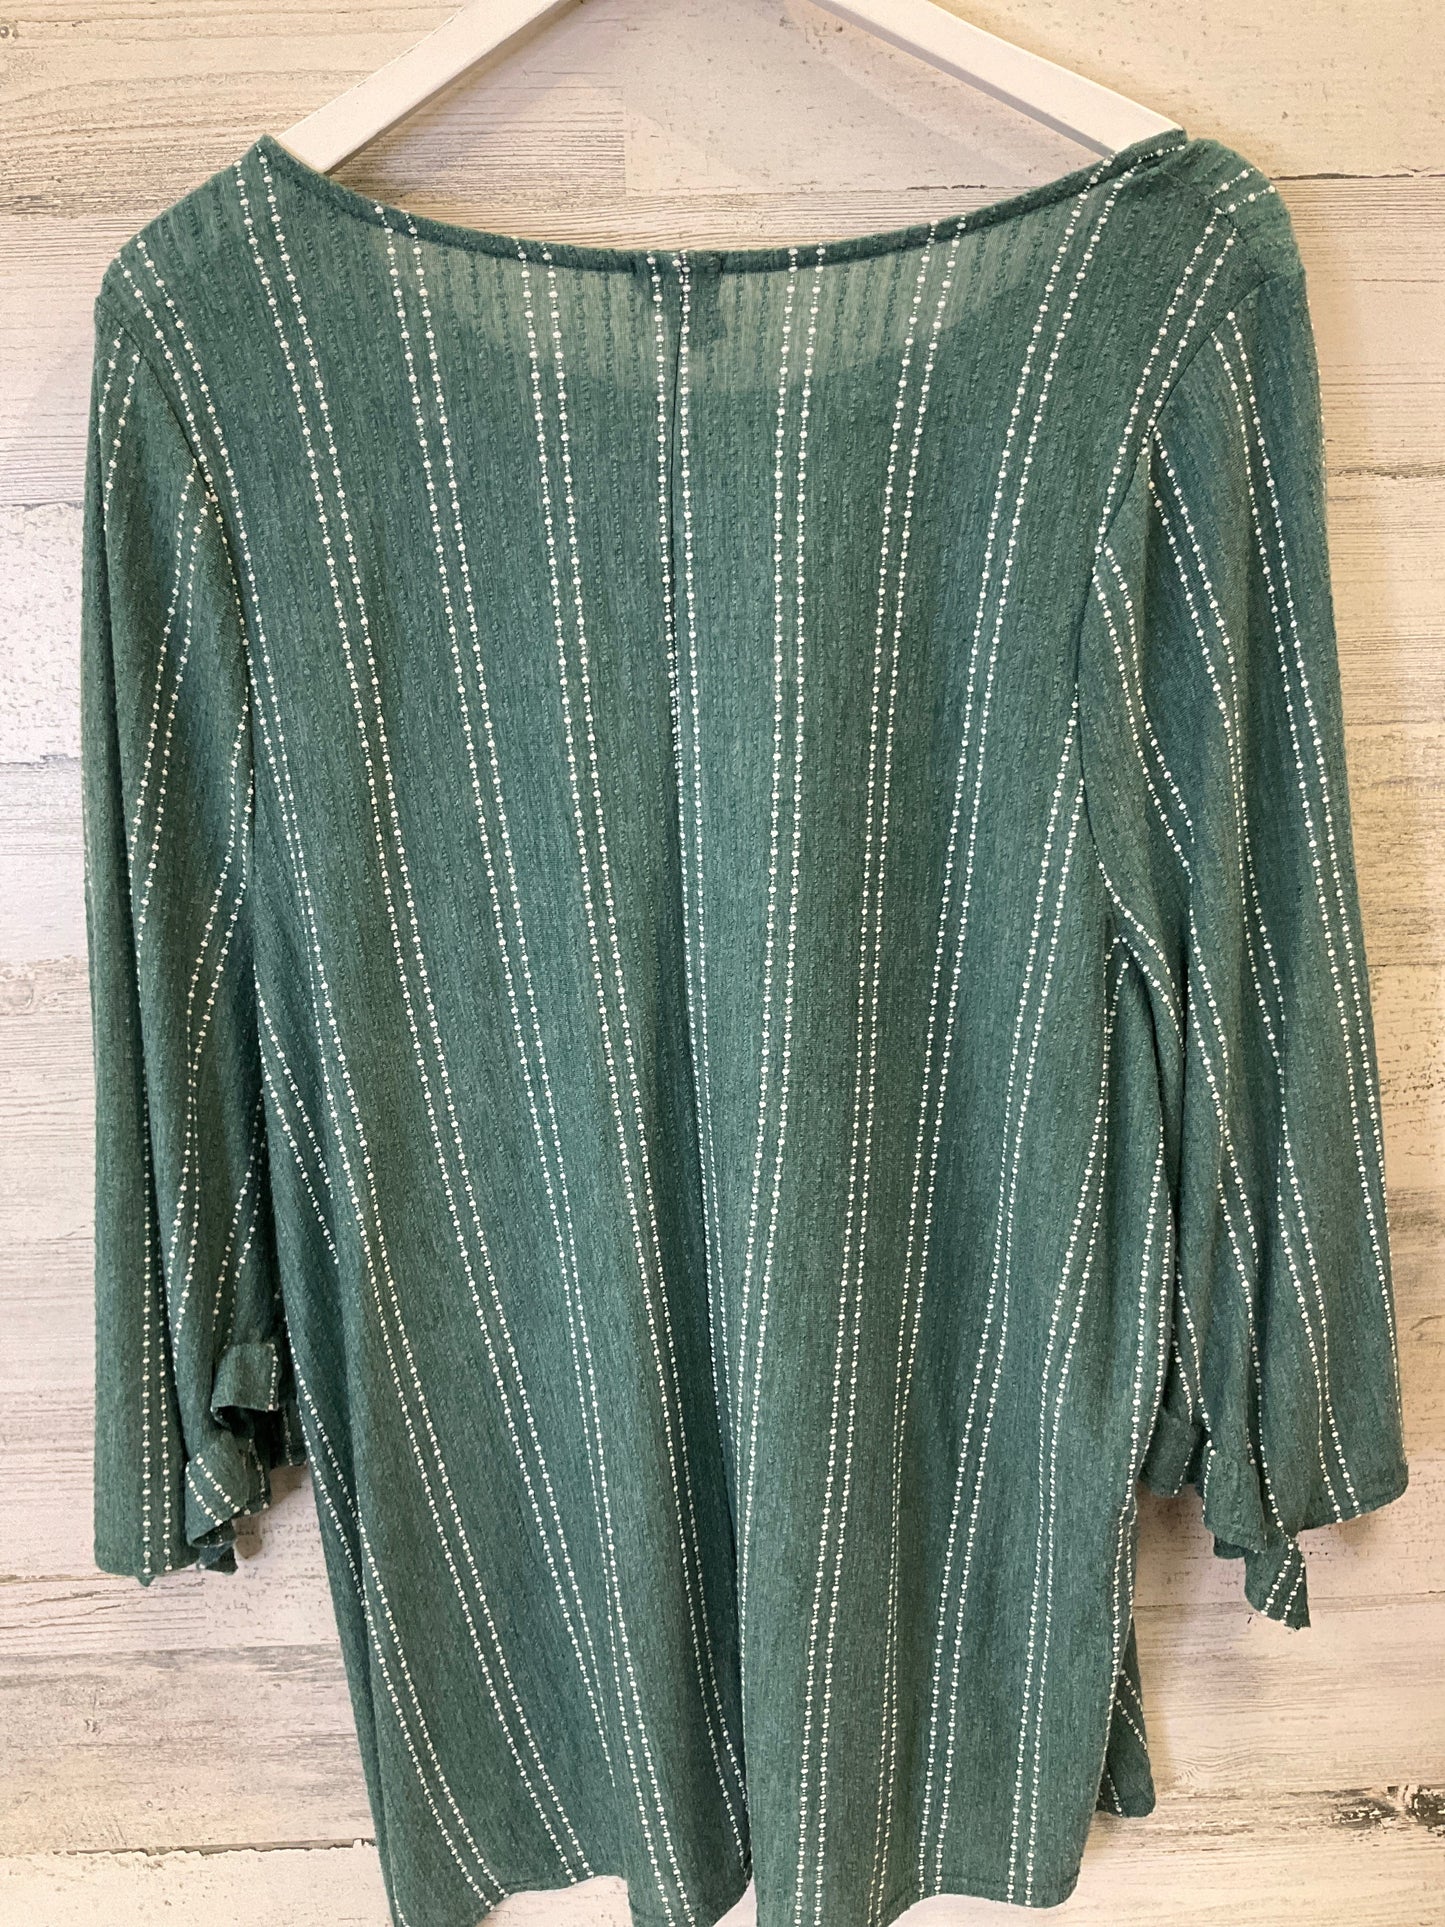 Green & White Top 3/4 Sleeve W5, Size 2x